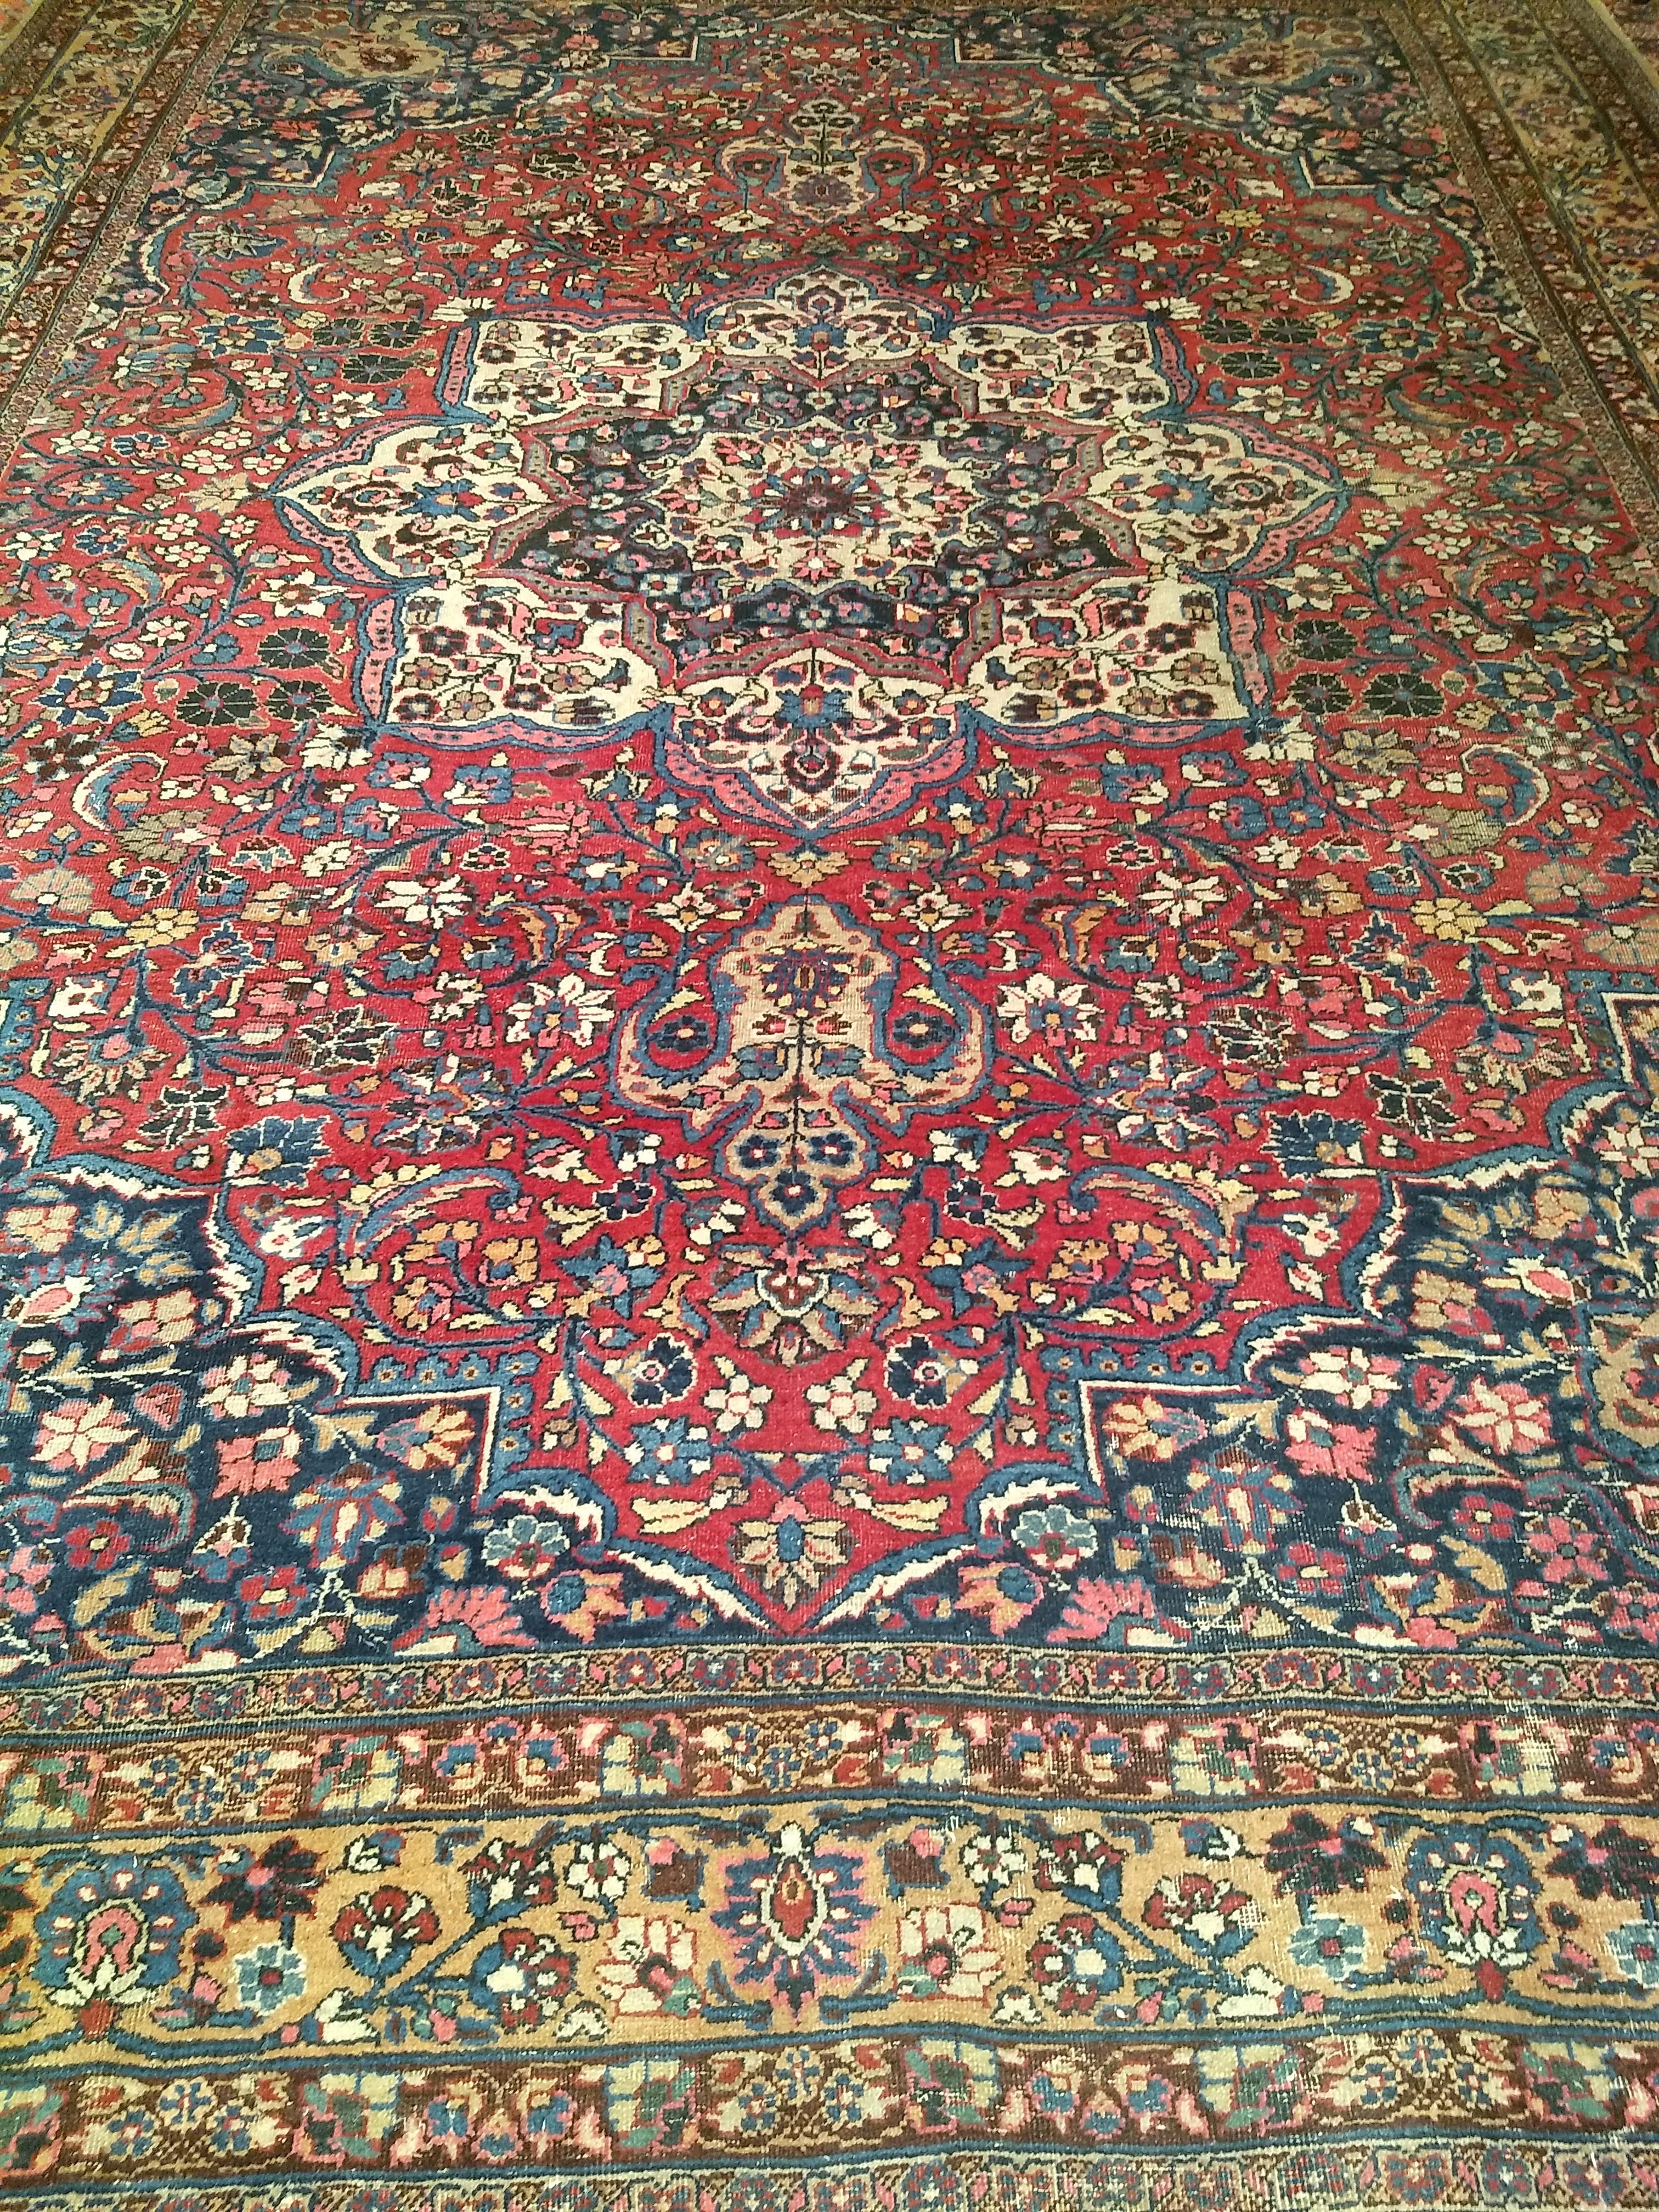 Room Size Persian Khorassan in a floral design with a central medallion from the early 1900s.  The design is set in a rich crimson red field color.  The main design consists of flowers and branches in various colors including red, green, pink,